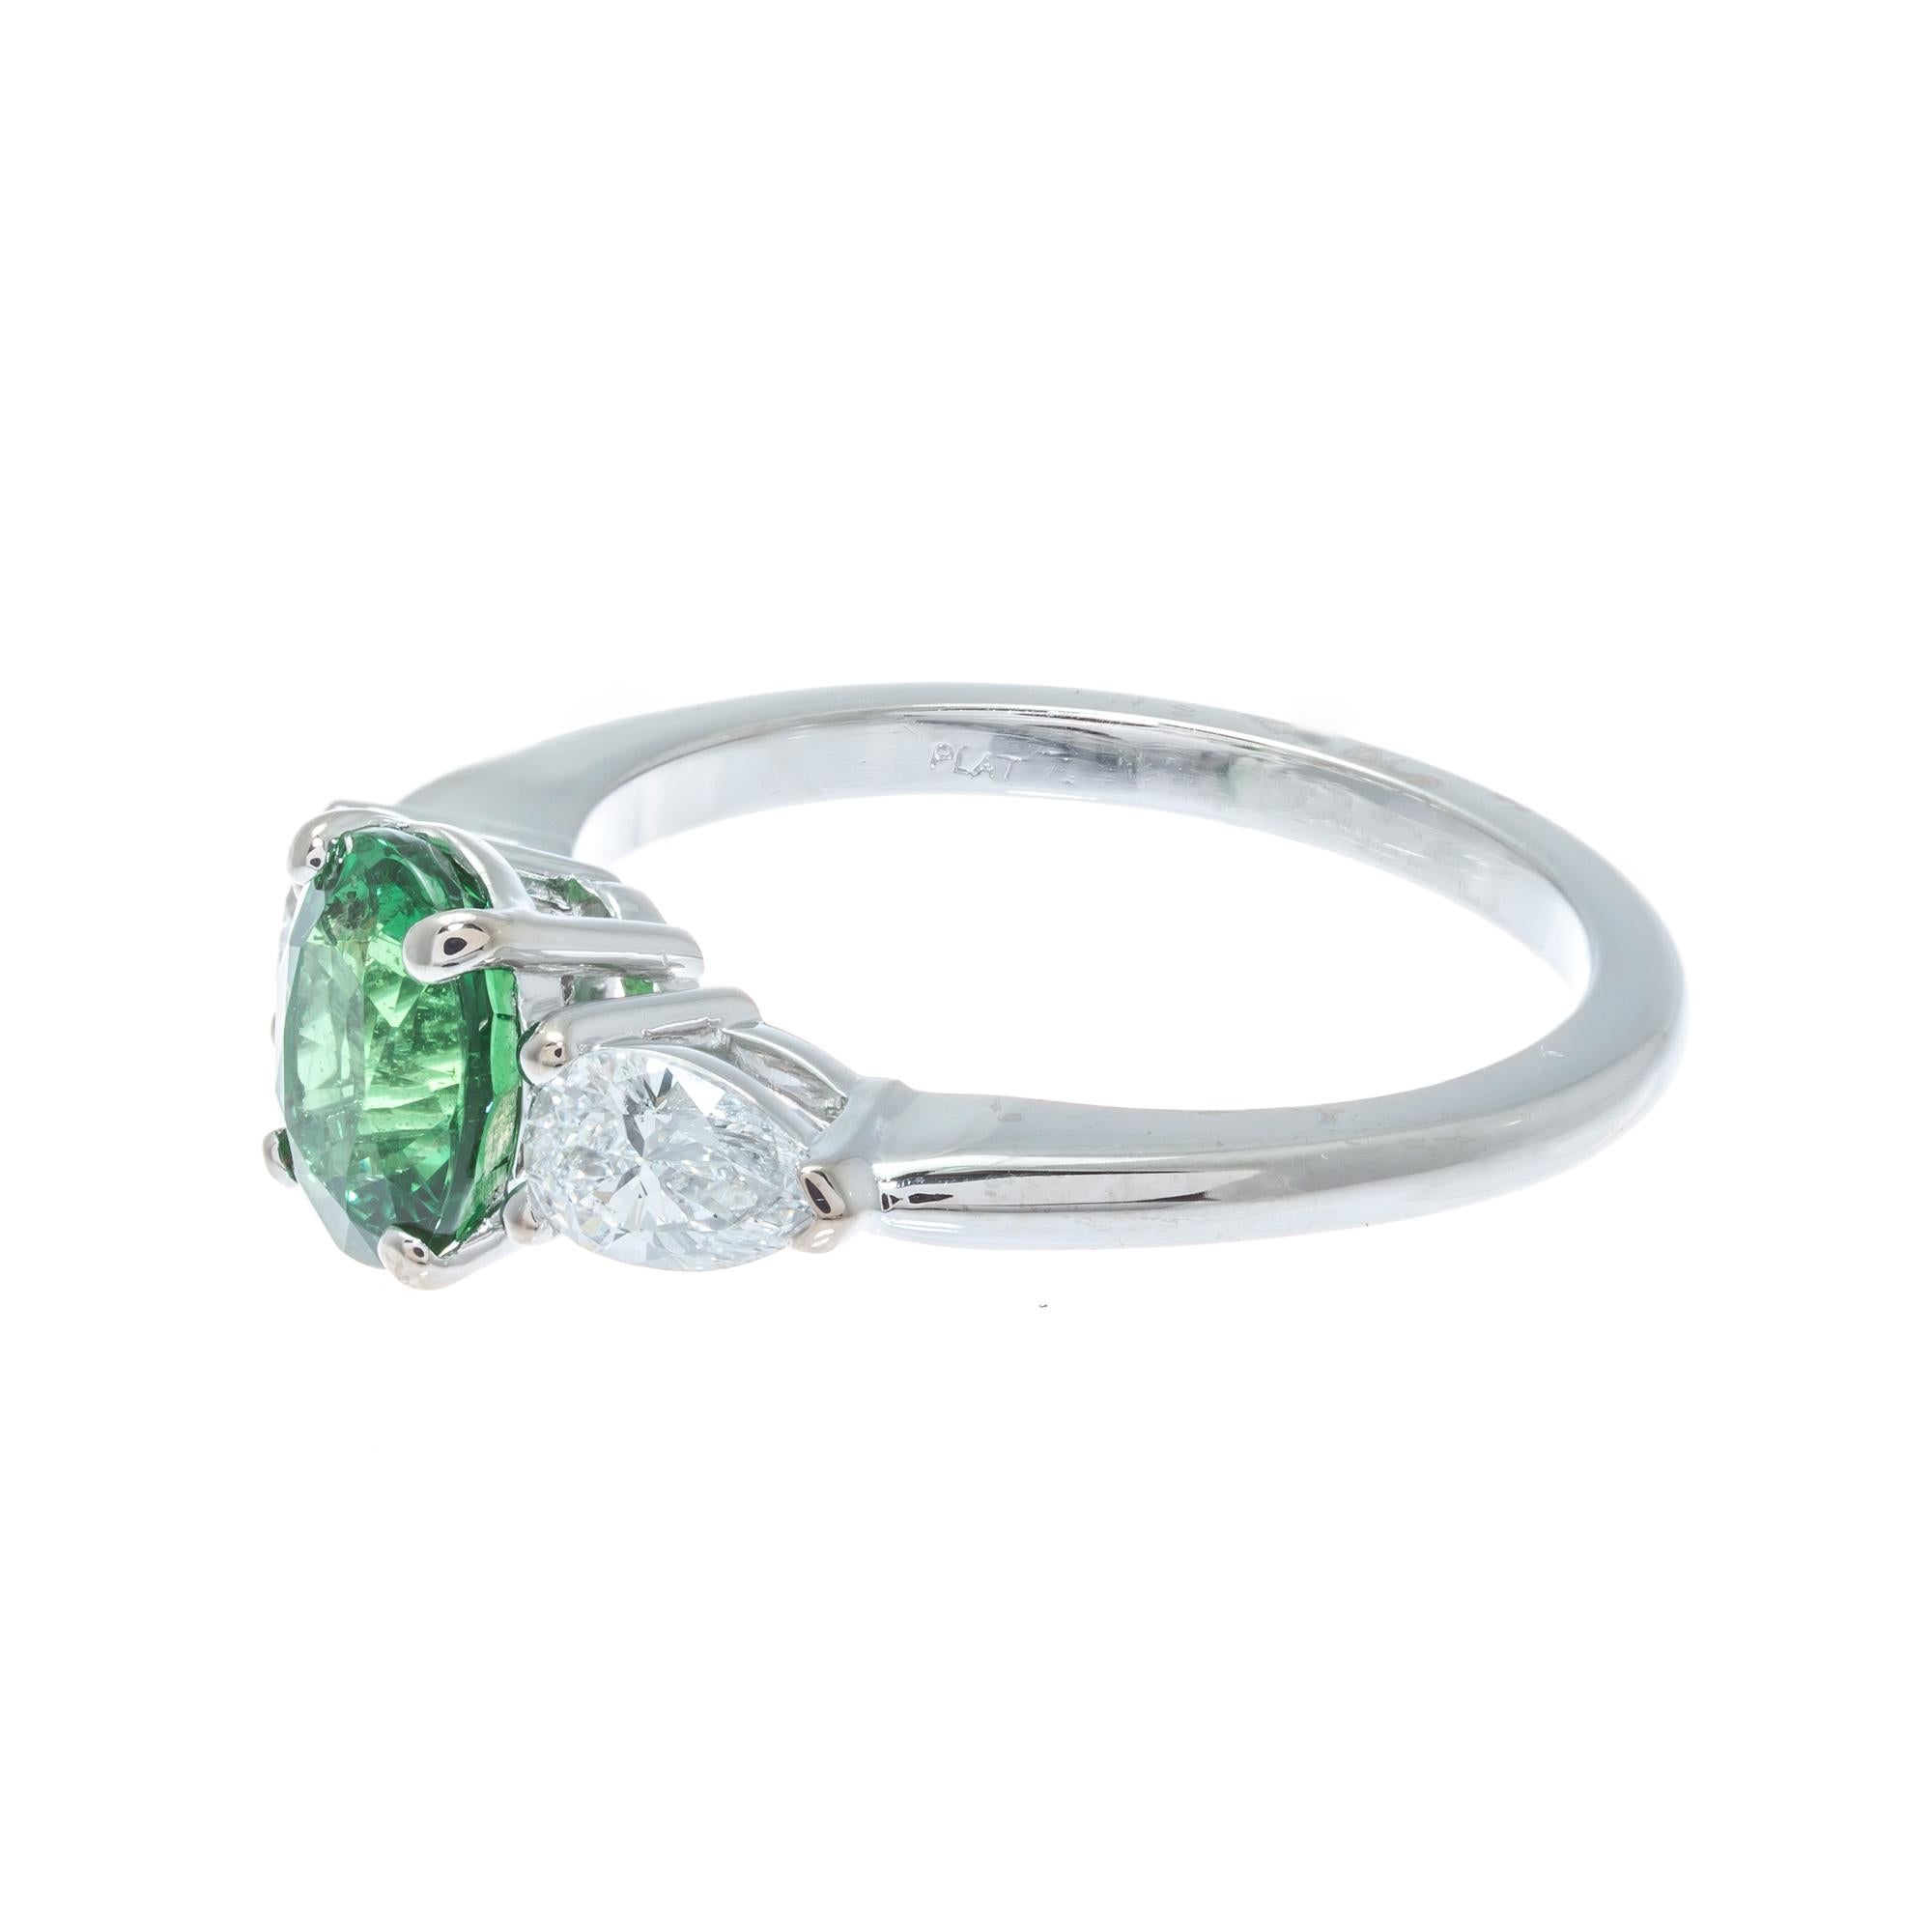 Bright green tsavorite garnet and diamond three-stone engagement ring. GIA certified natural oval tsavorite center stone with two pear shaped accent side diamonds. The platinum setting was designed in the Peter Suchy Workshop.

1 oval green SI